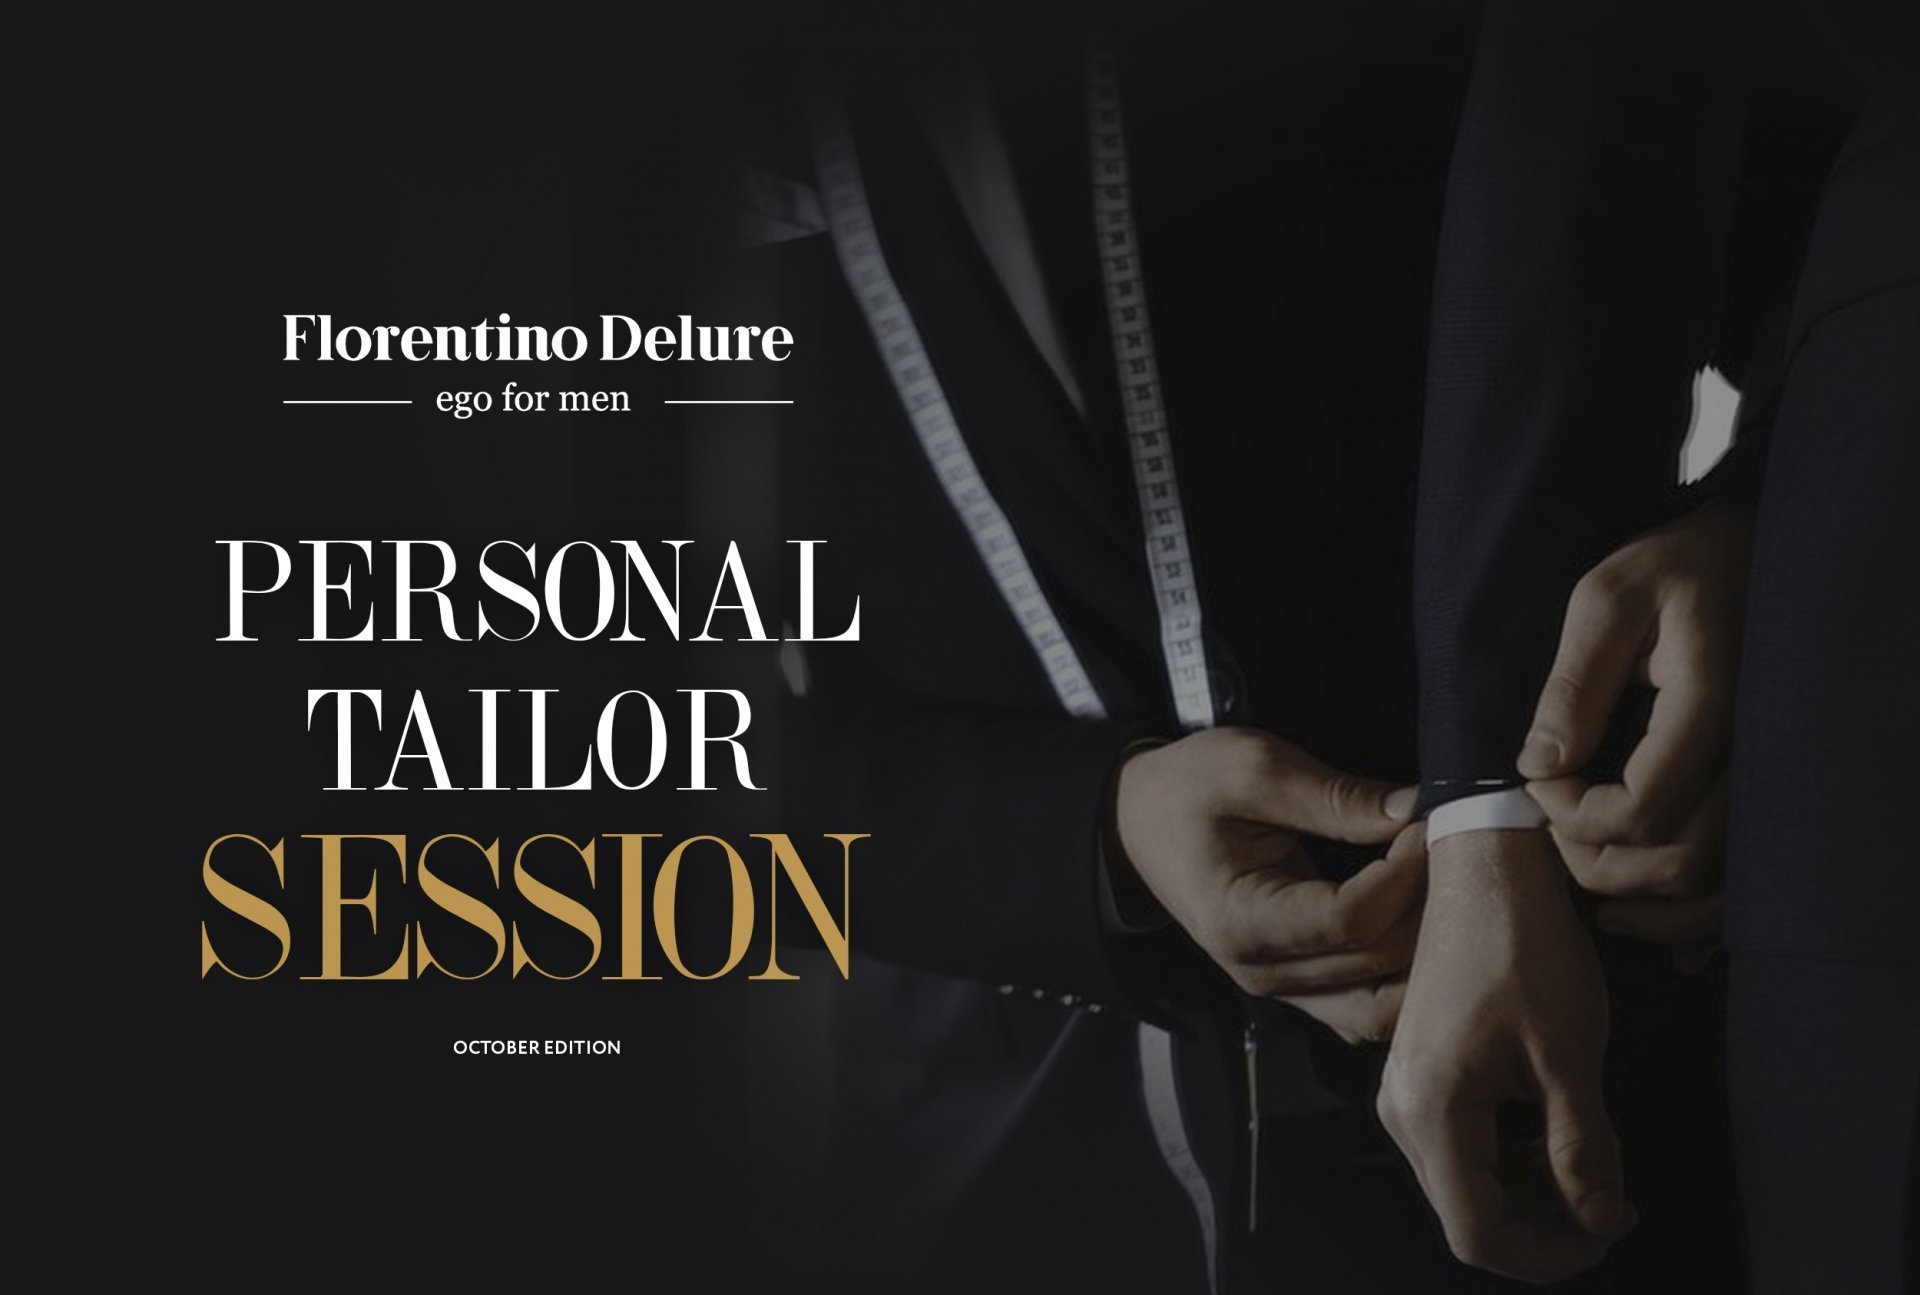 Personal Tailor Session